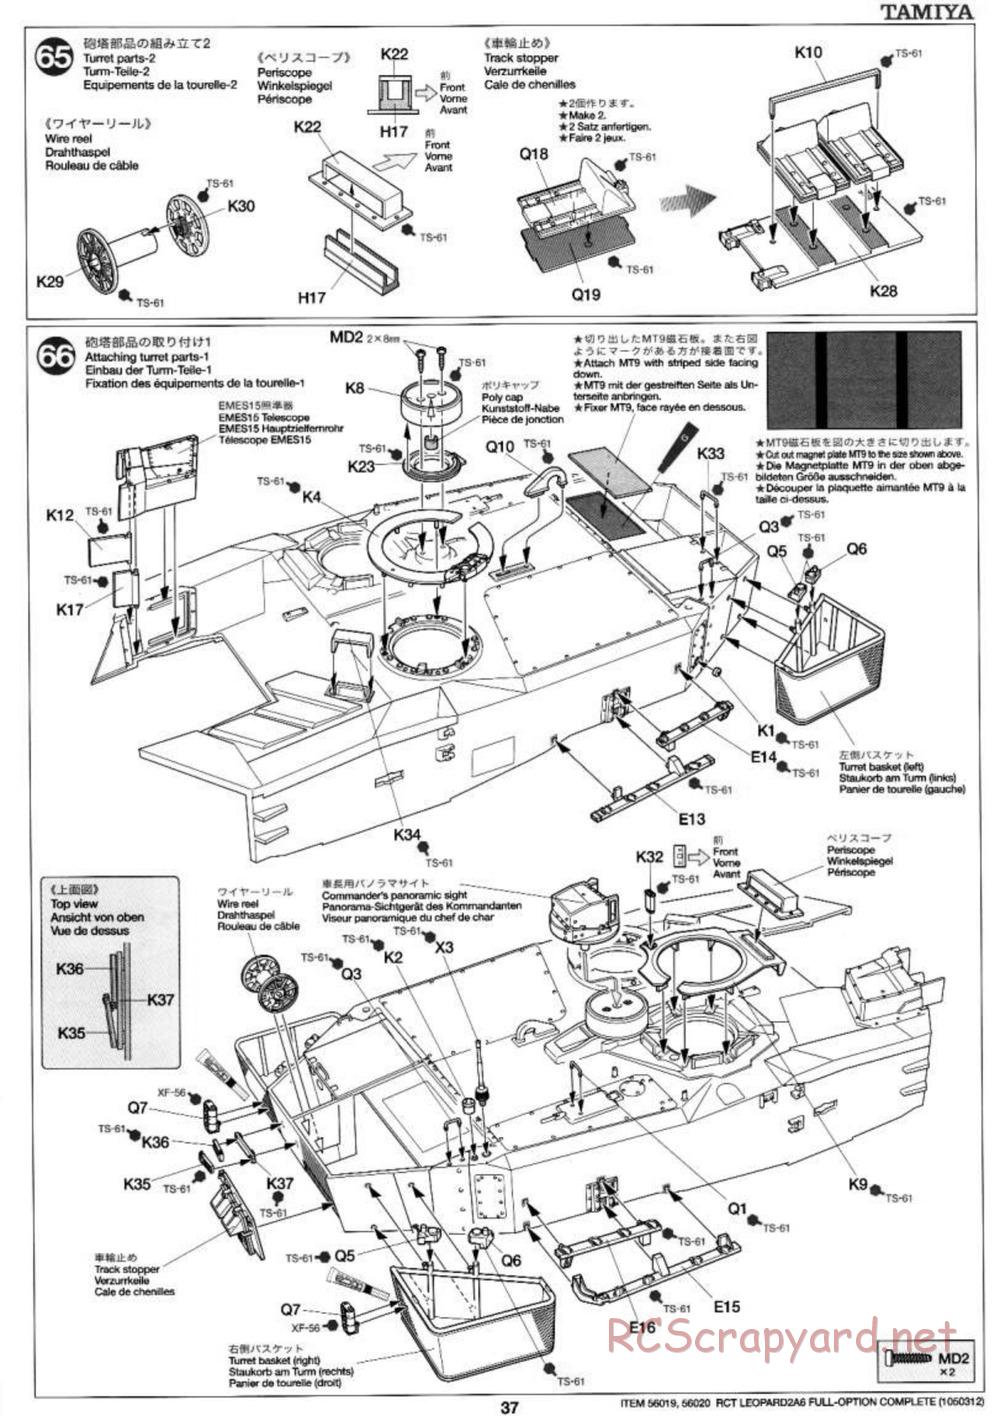 Tamiya - Leopard 2 A6 - 1/16 Scale Chassis - Manual - Page 37